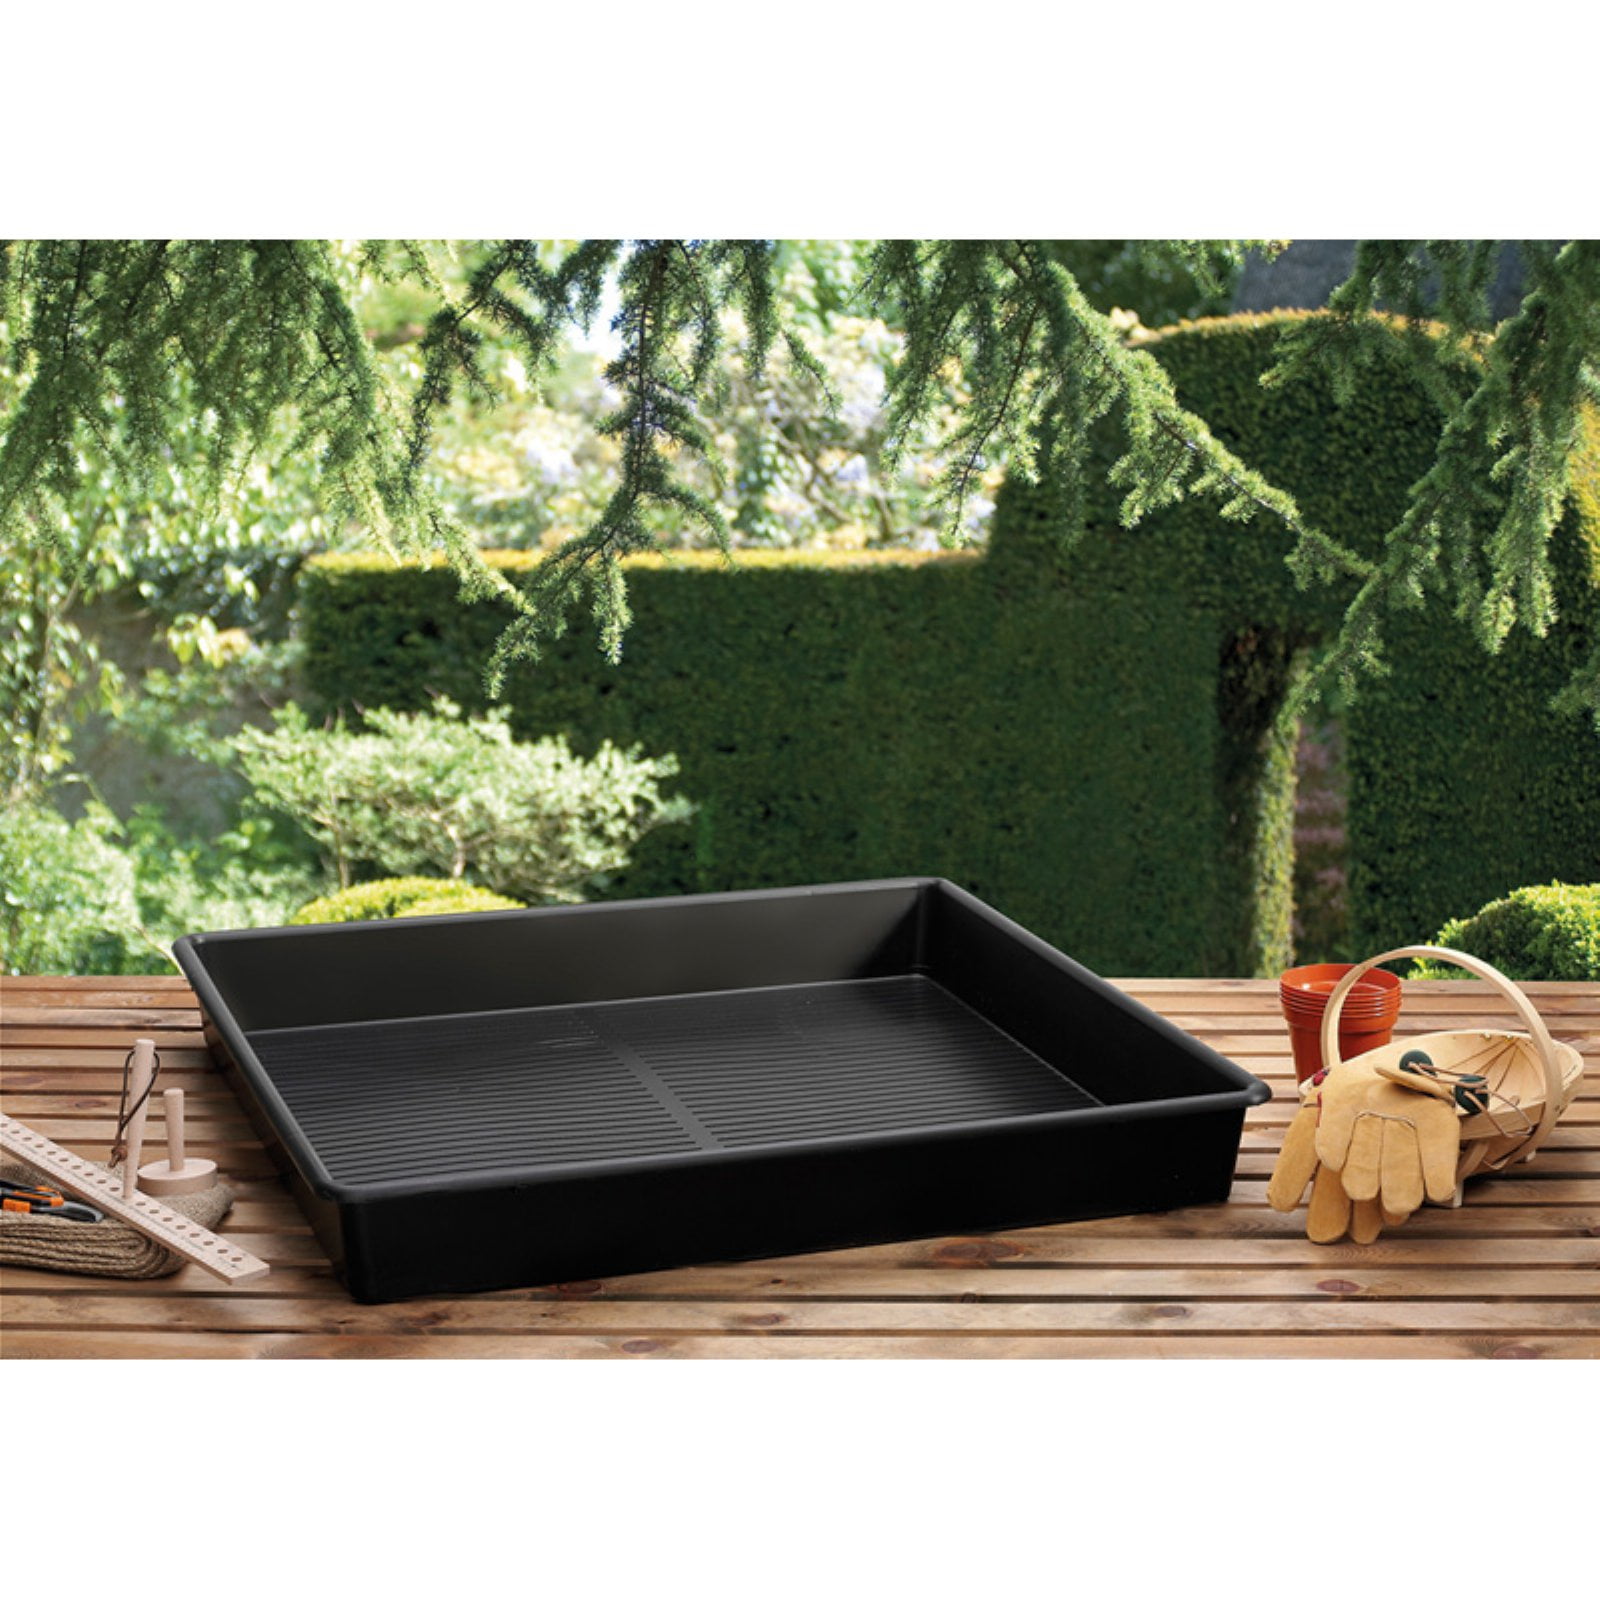 GARLAND SQUARE GARDEN TRAY by Garland